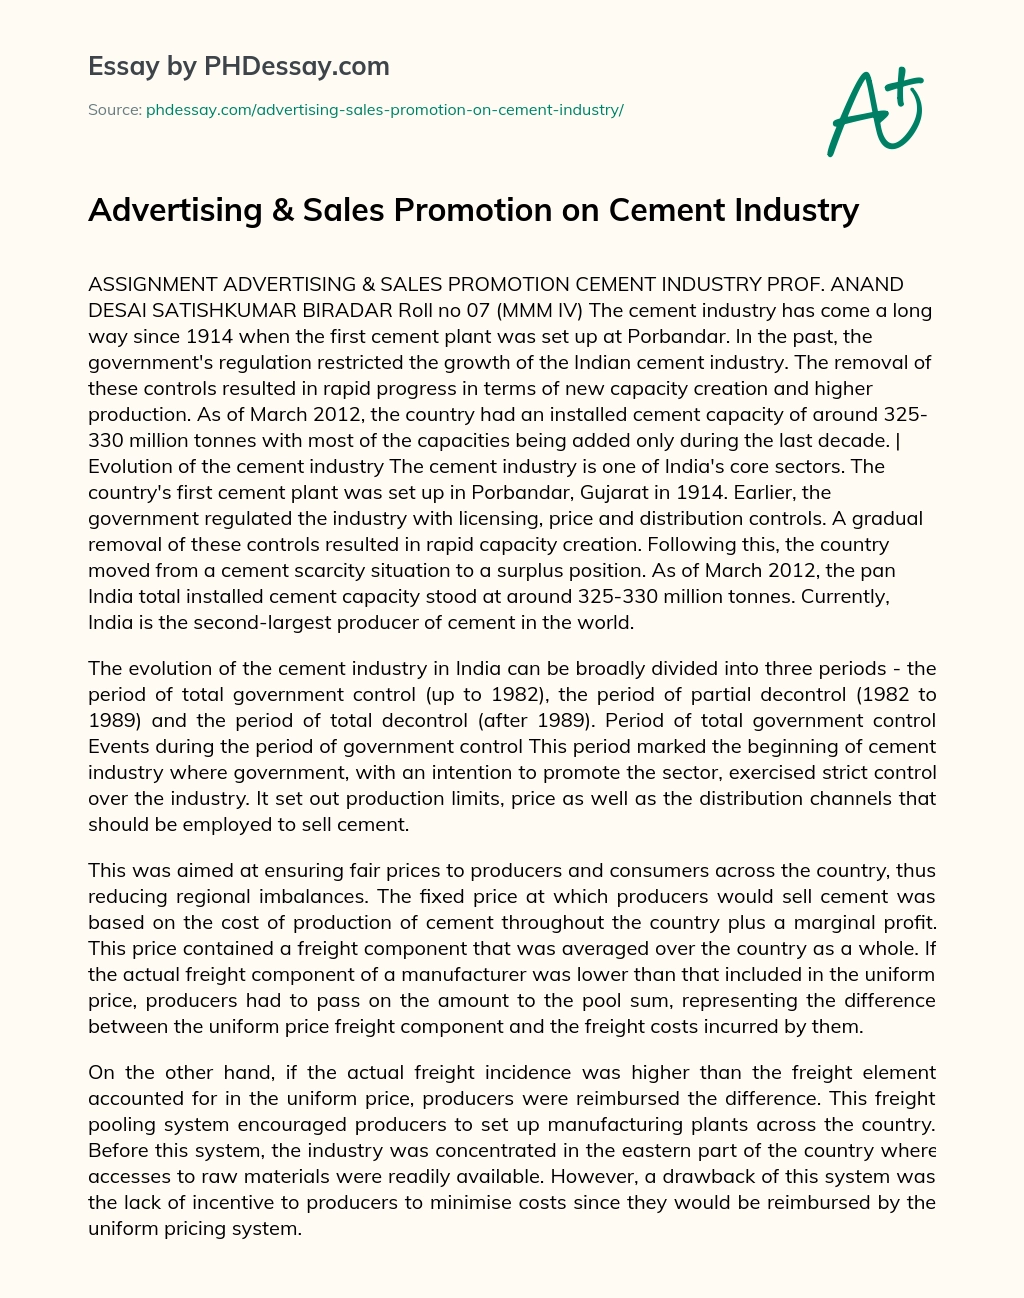 Advertising & Sales Promotion on Cement Industry essay